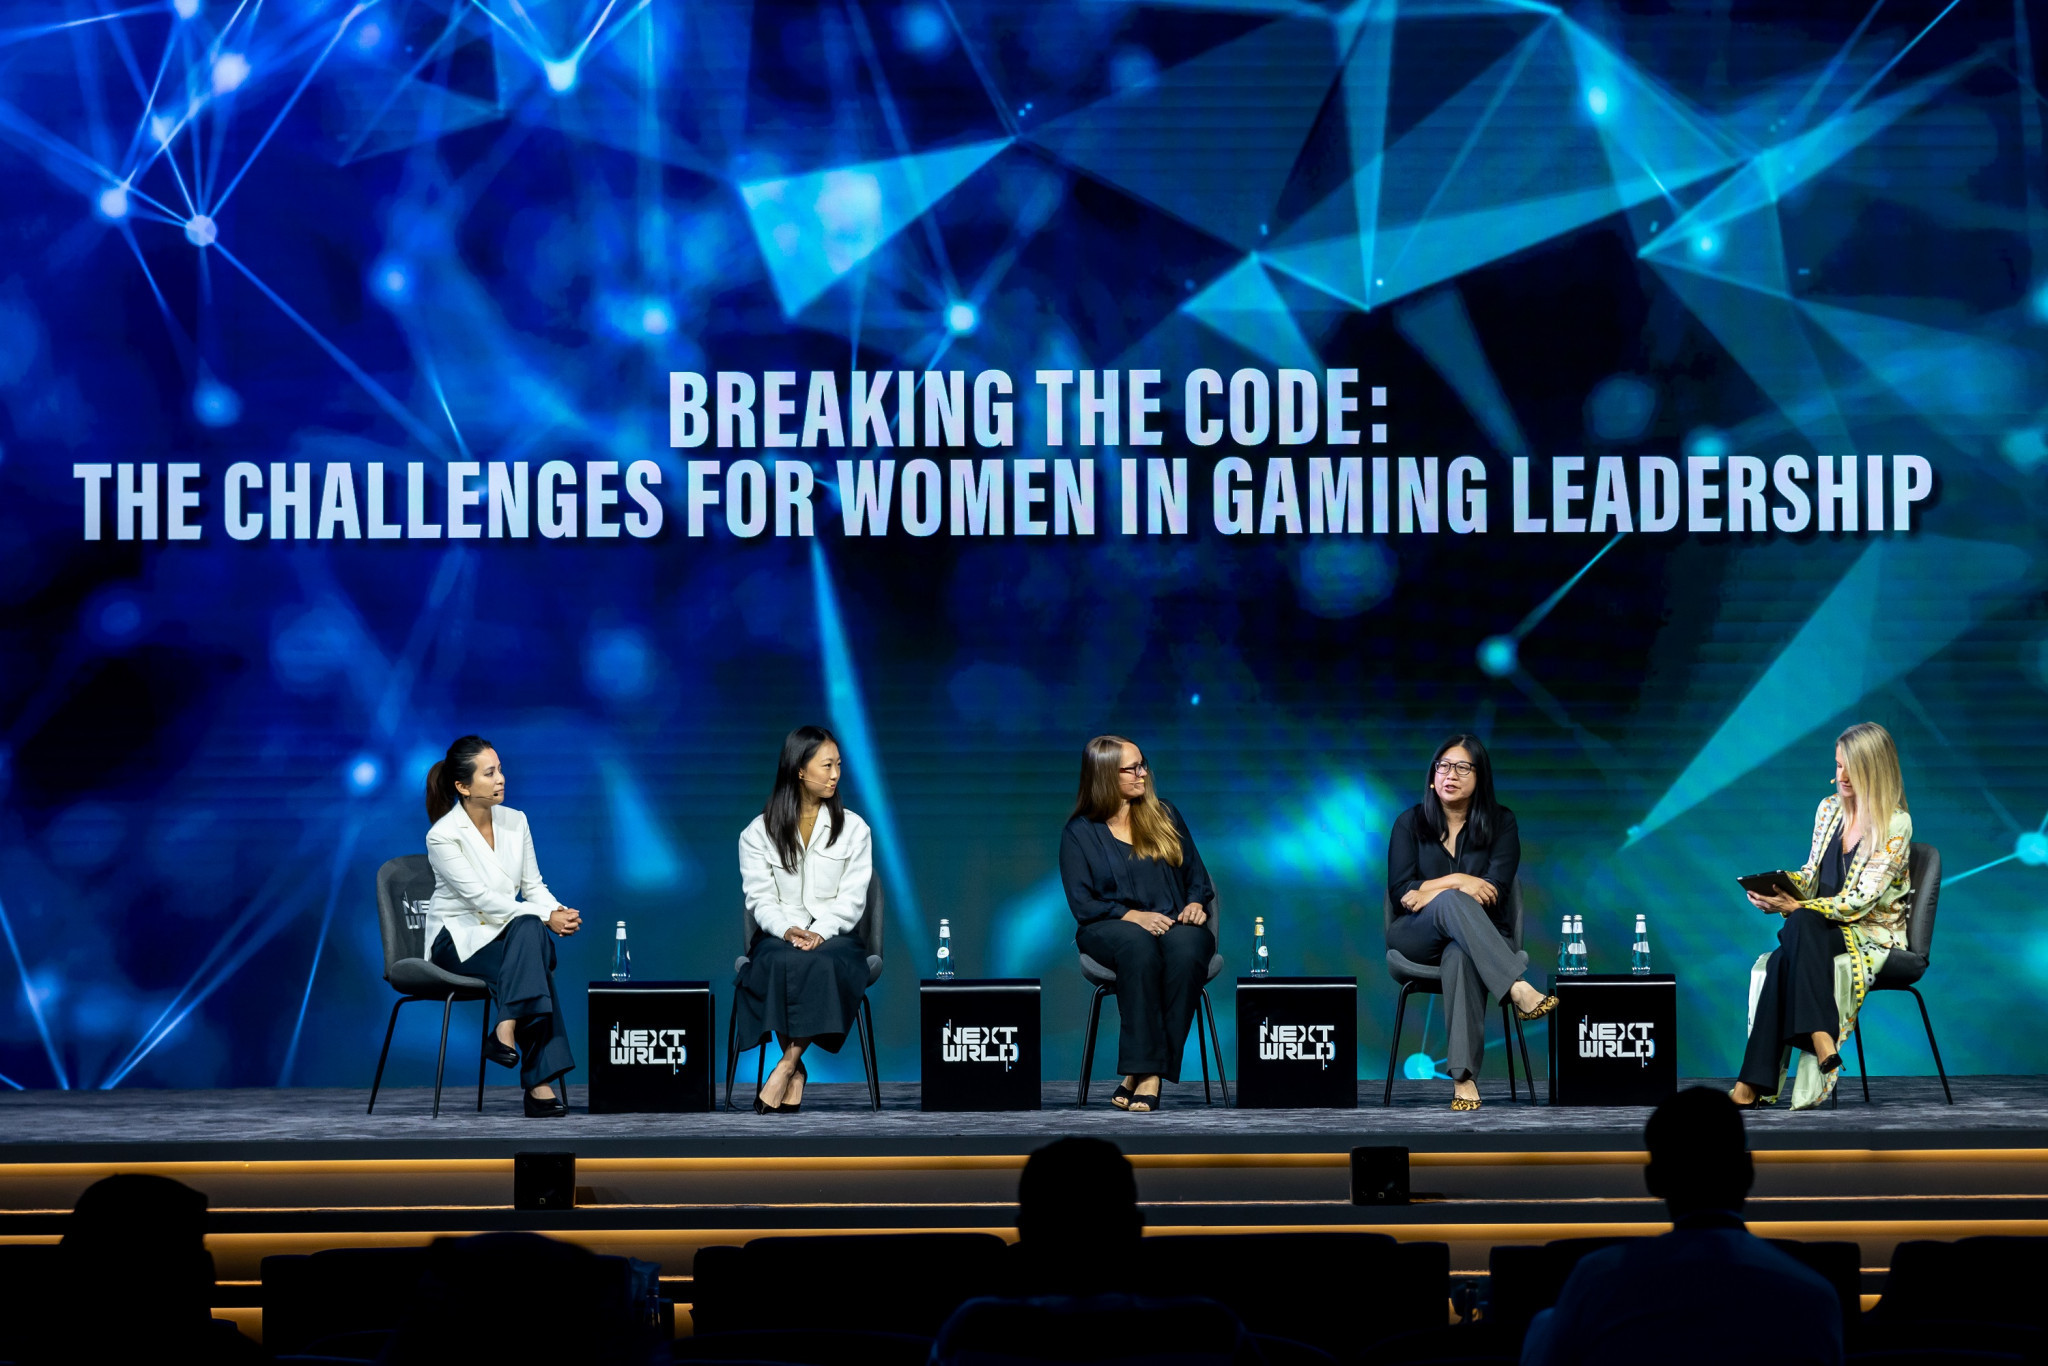 The challenges for women in gaming leadership was among the topics covered during the Next World Forum in Riyadh ©Saudi Esports Media